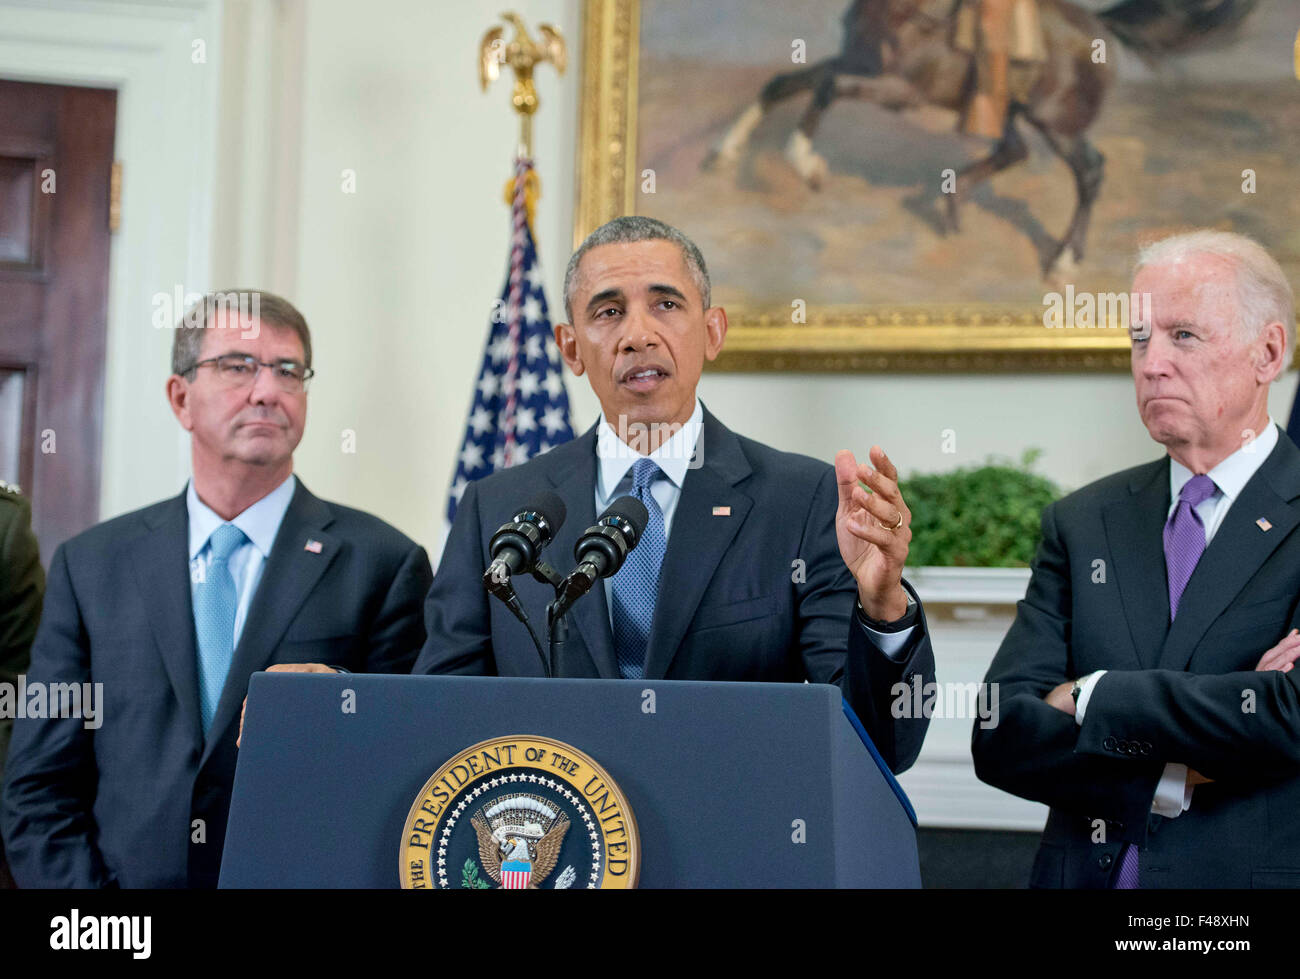 United States President Barack Obama announces he will keep 5,500 US troops in Afghanistan when he leaves office in 2017 and explains his reasoning for that action in the Roosevelt Room of the White House in Washington, DC on Thursday, October 15, 2015. Looking on are US Secretary of Defense Ashton Carter, left, and US Vice President Joe Biden, right. Credit: Ron Sachs/Pool via CNP - NO WIRE SERVICE - Stock Photo